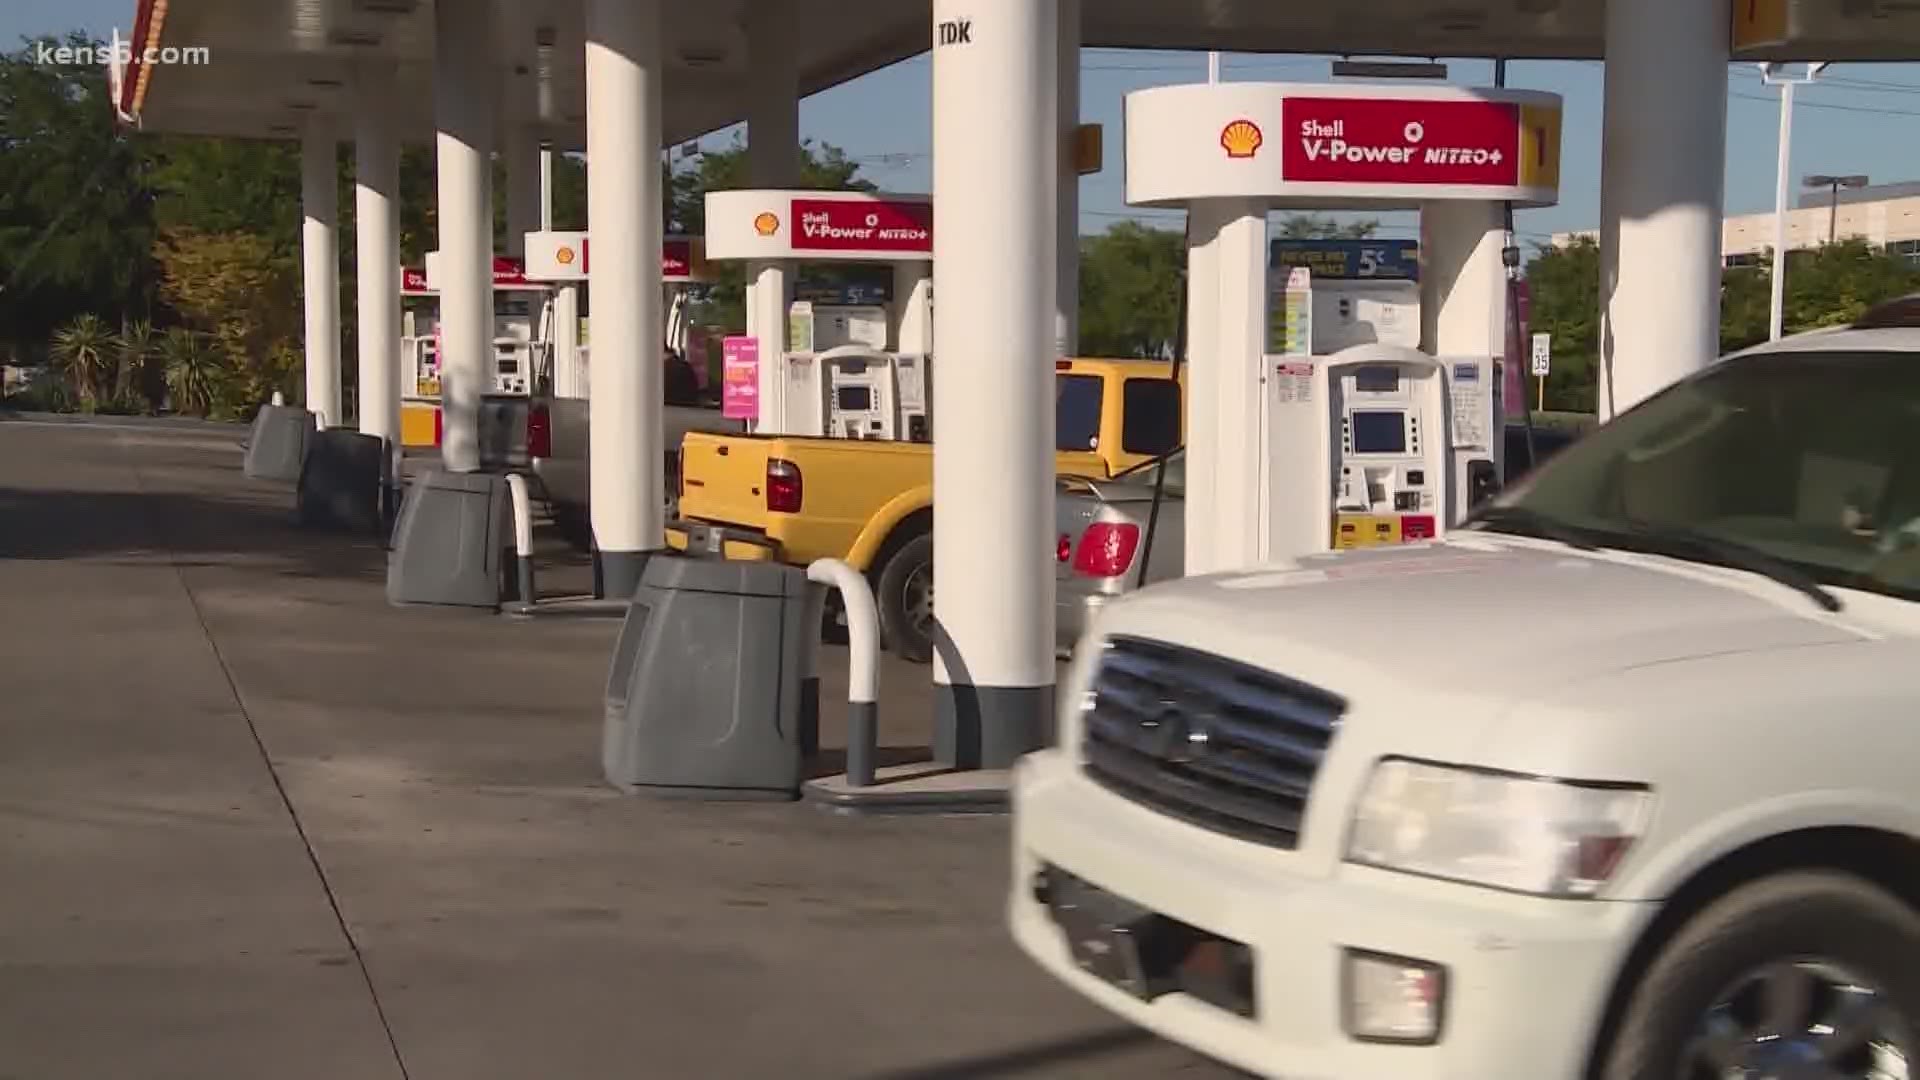 During the coronavirus outbreak, the manager at the Shell station on Medical Drive started offering curbside service to those with weaker immune systems.